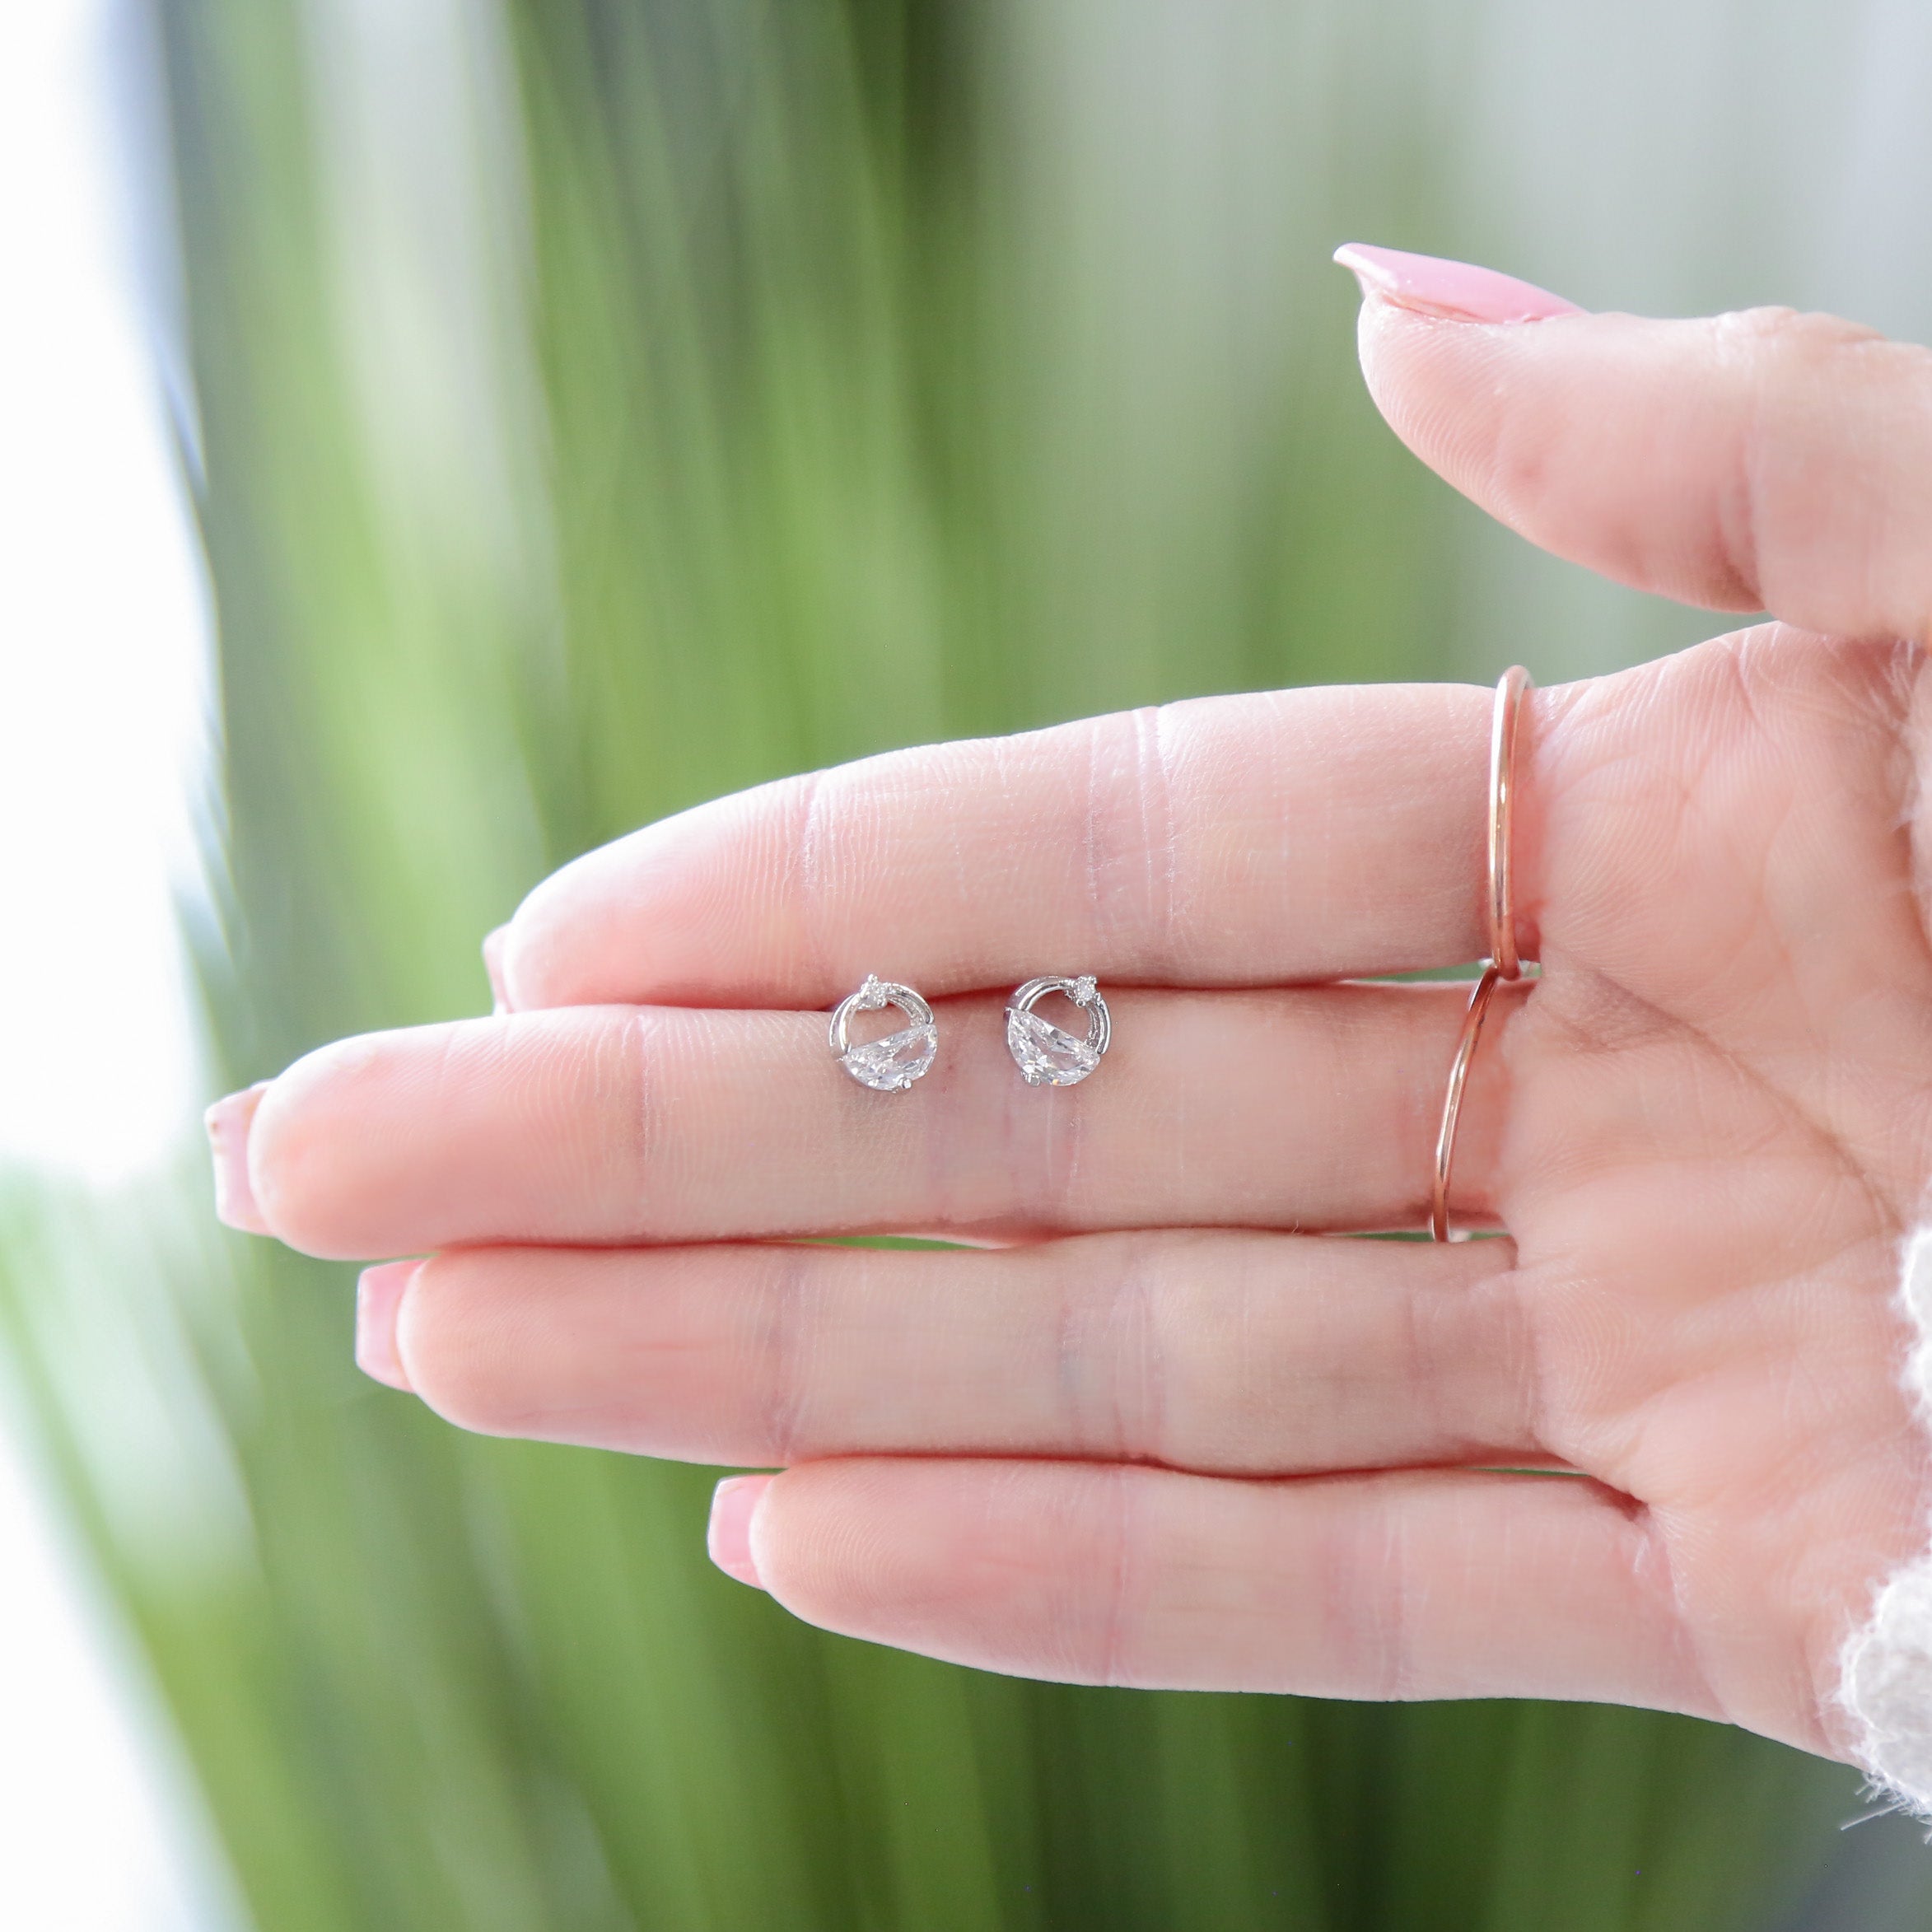 a woman's hand holding a tiny diamond ring